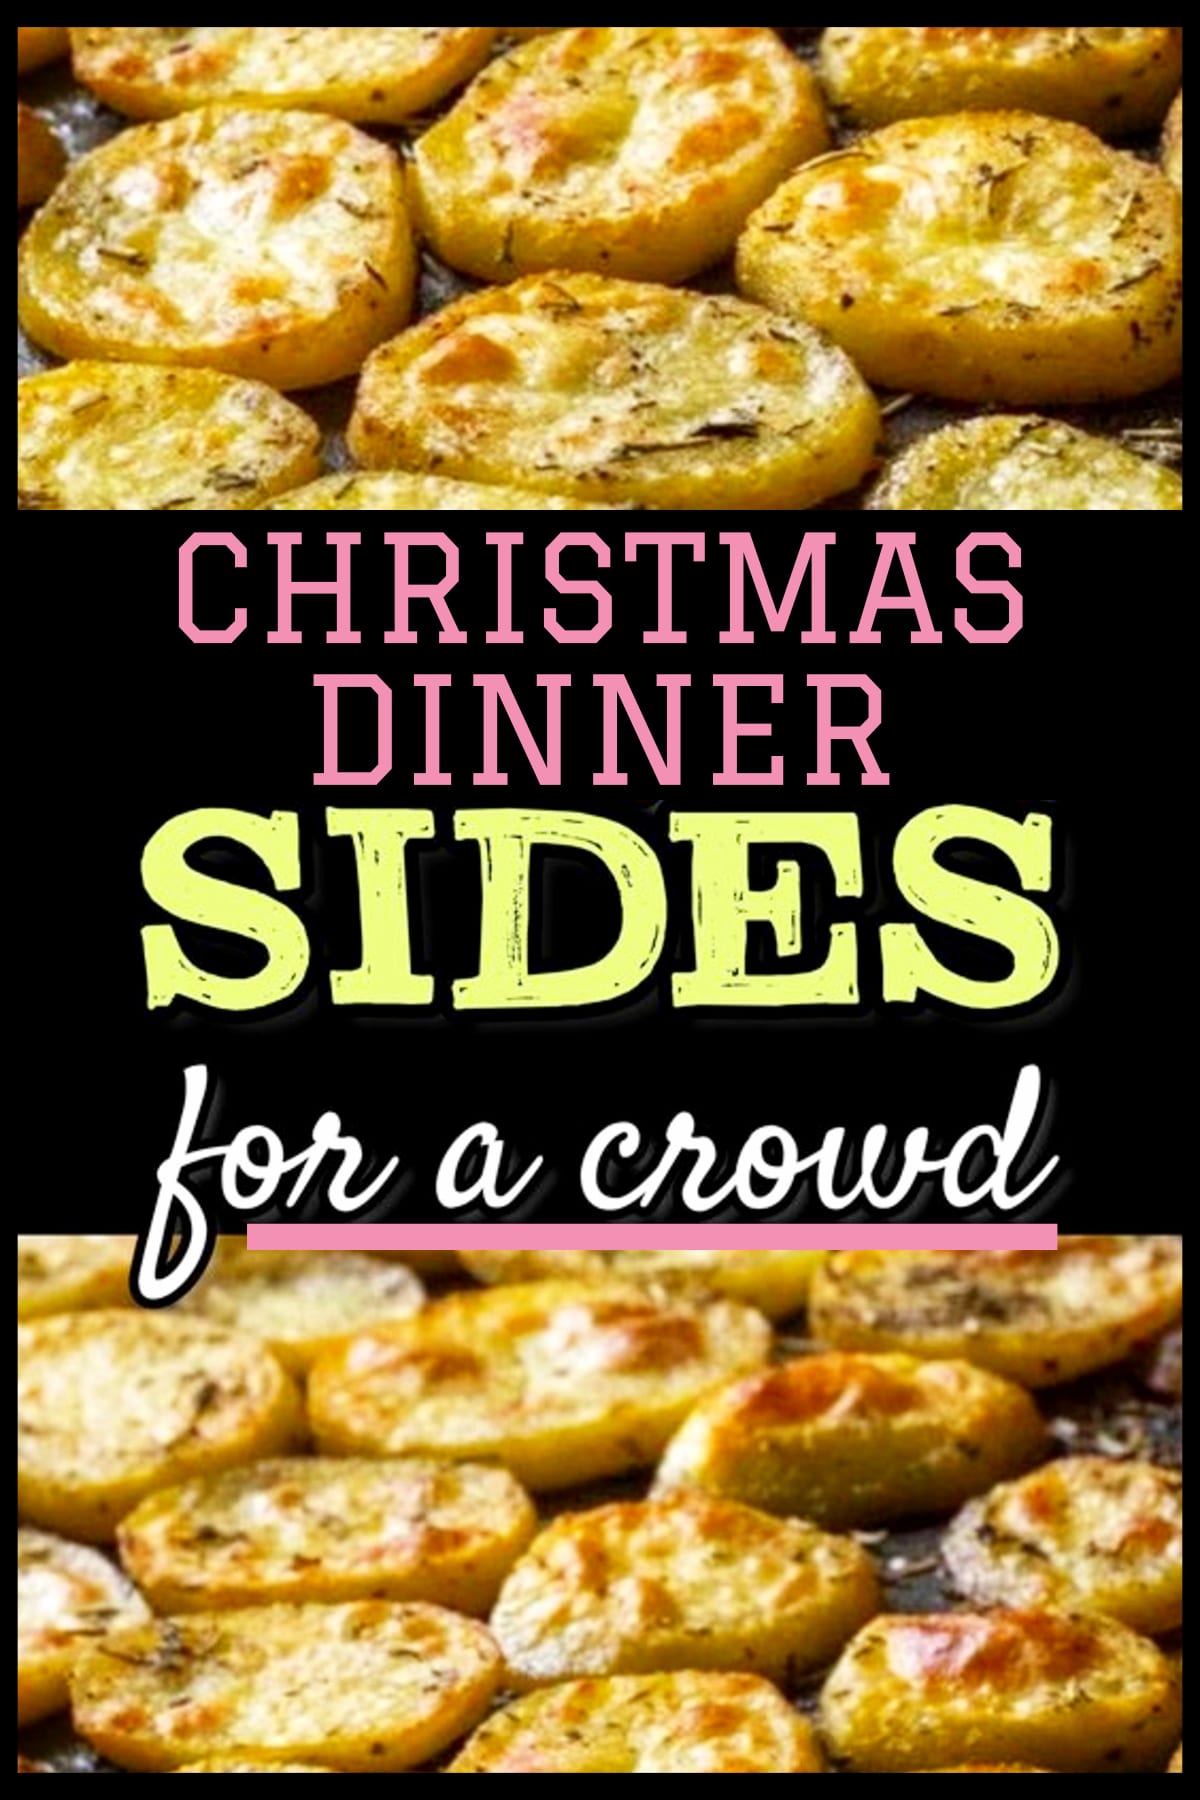 Christmas dinner side dishes for a crowd